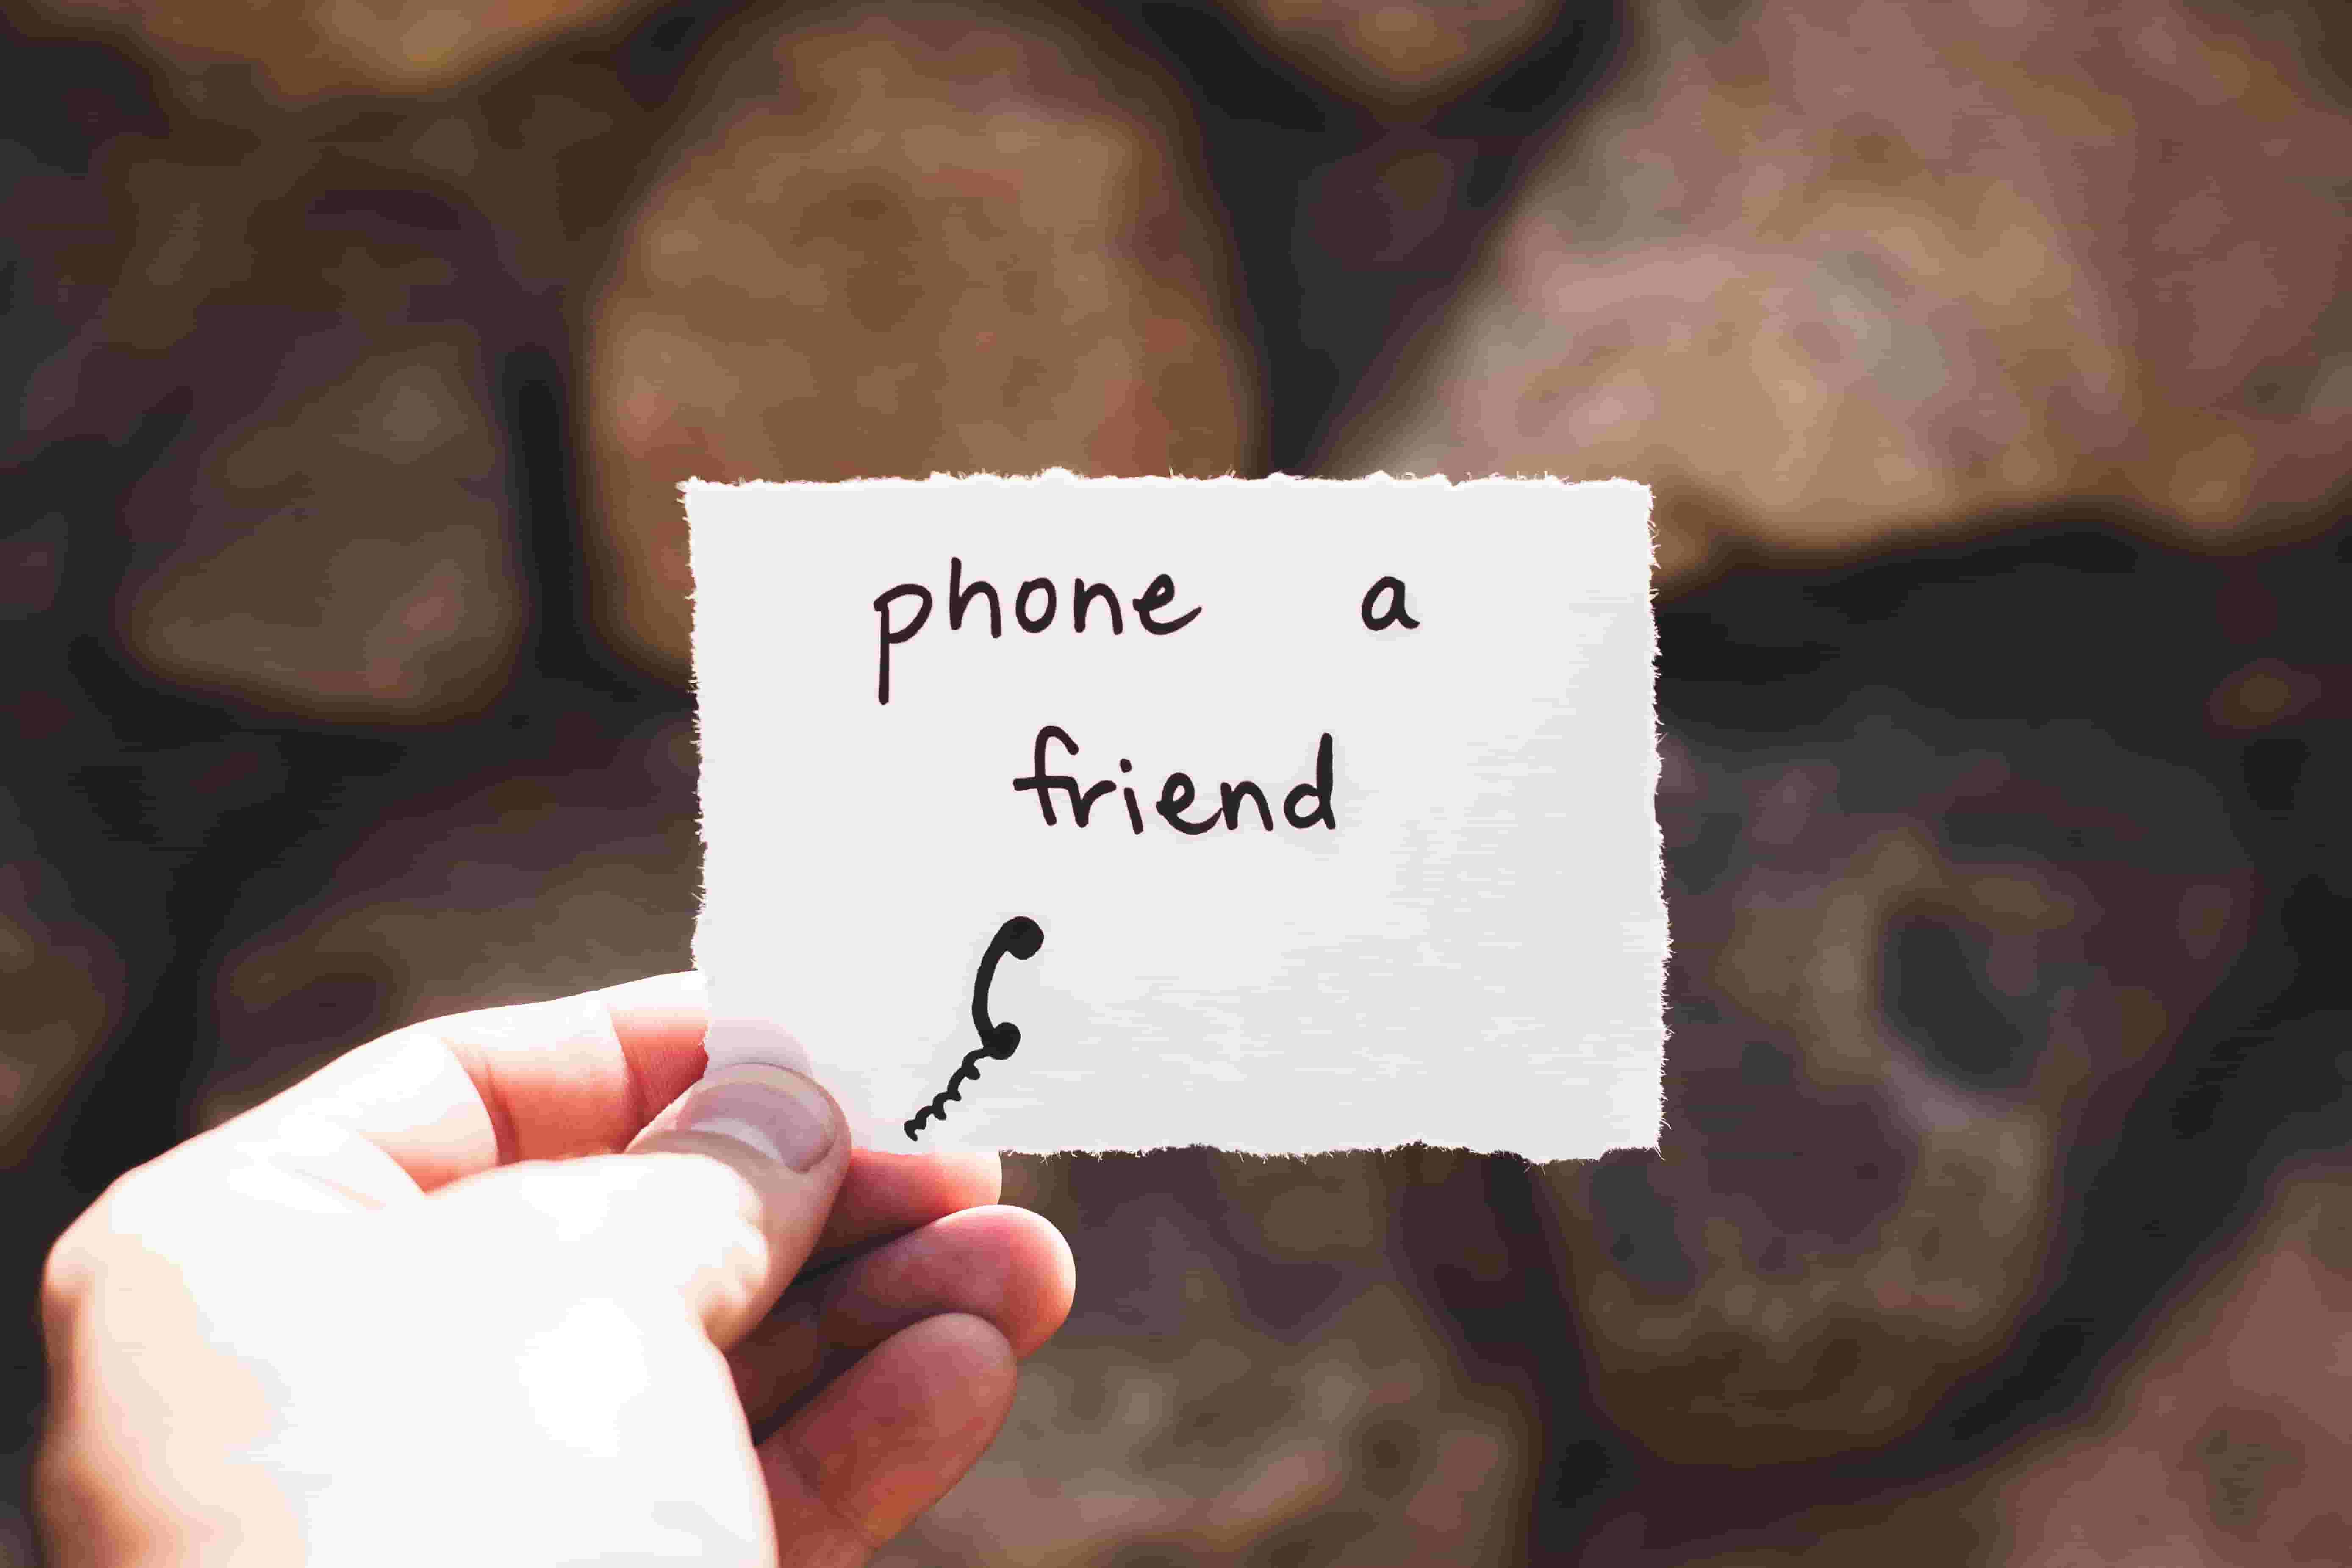 A person holds a piece of paper with 'phone a friend' written on it